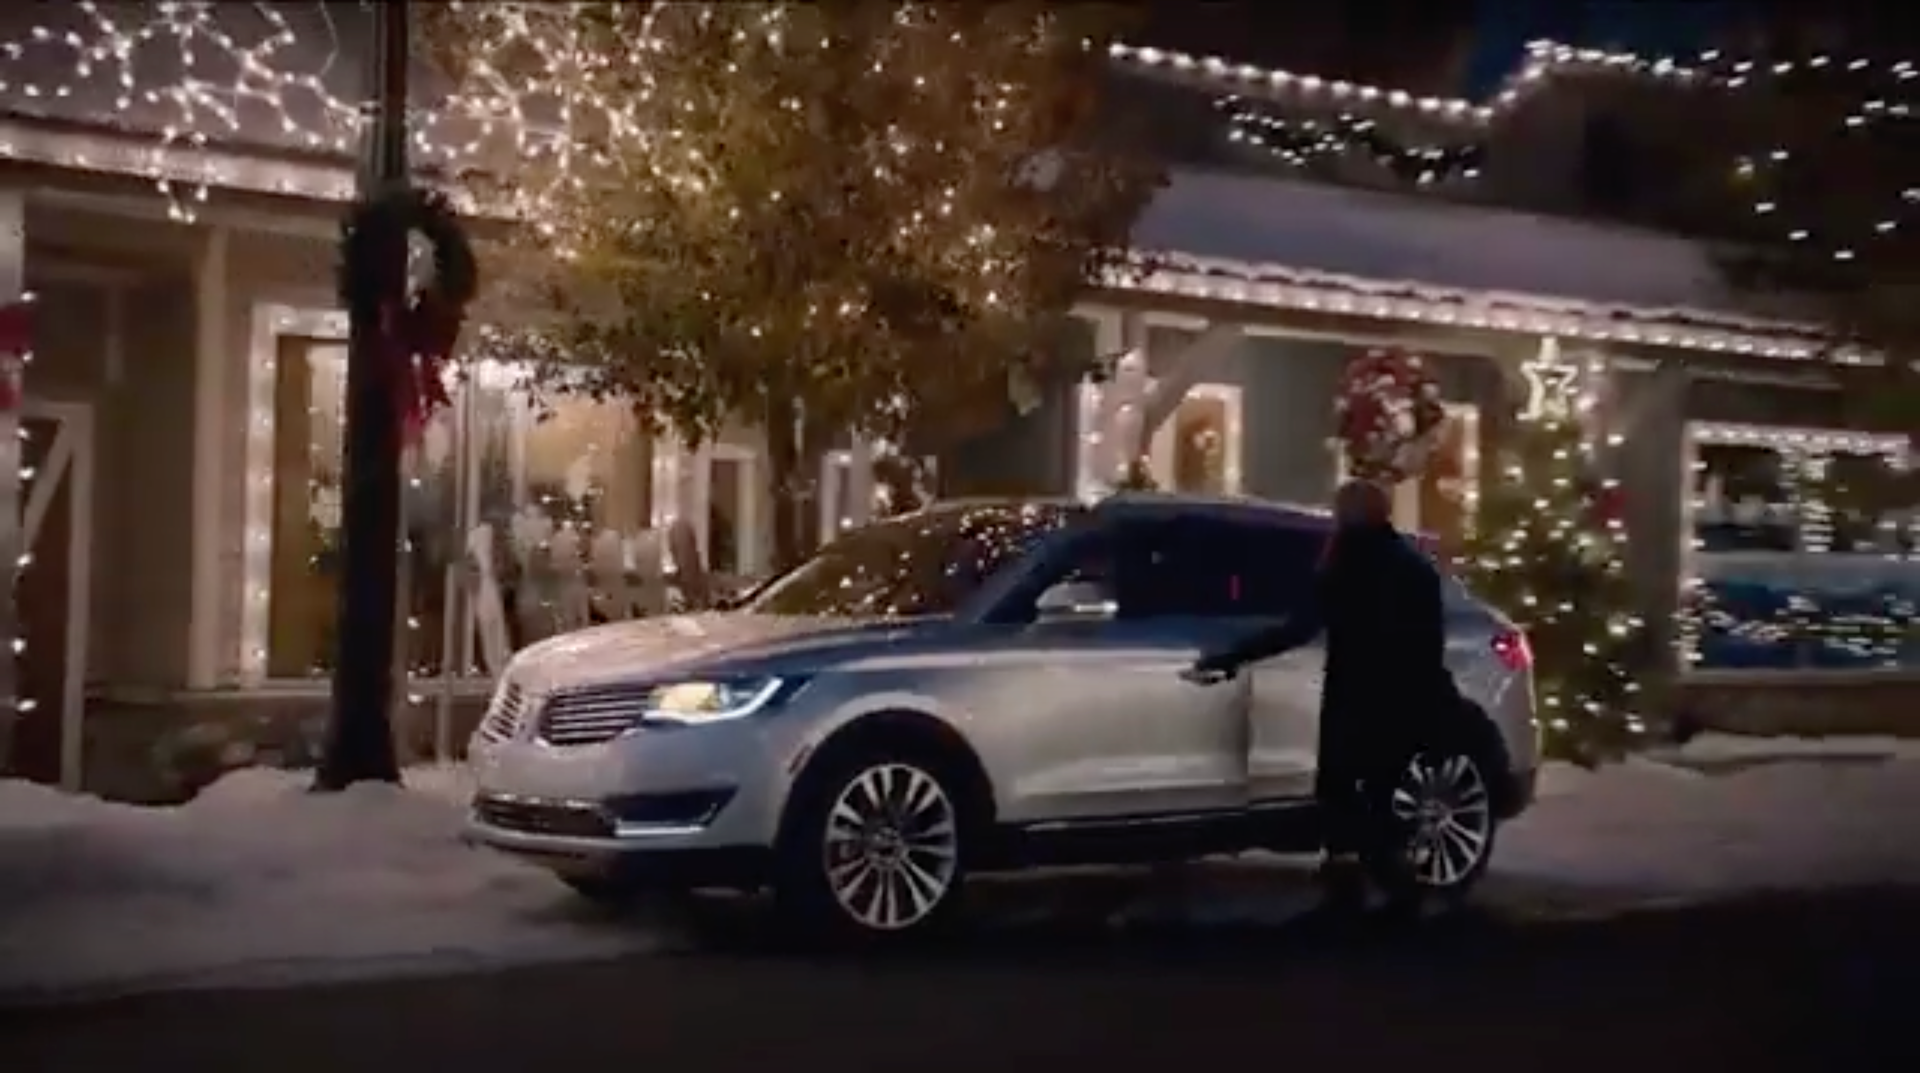 Load video: Lincoln Wish List Event Commercial that we did lights for